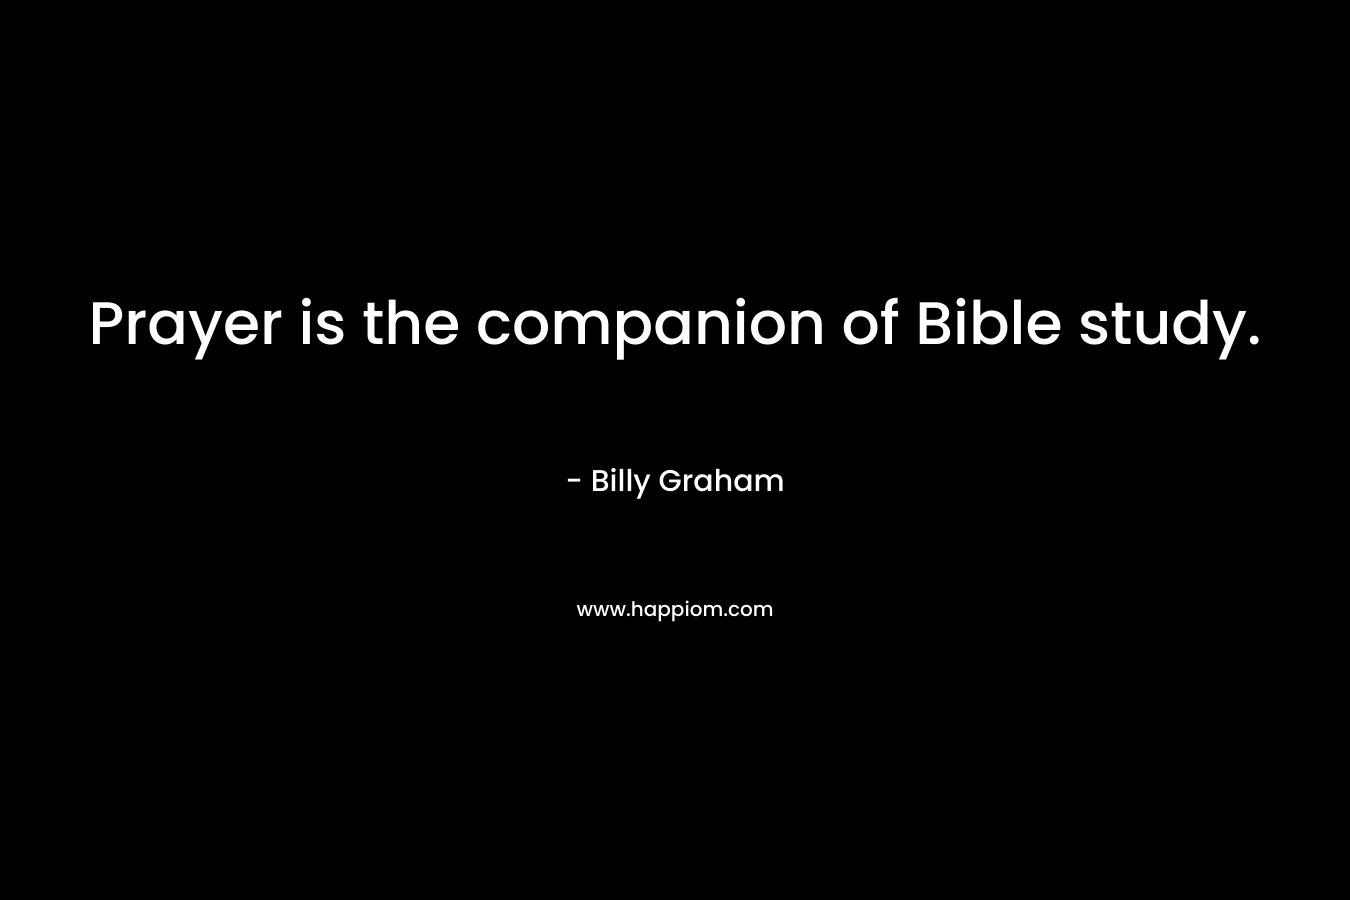 Prayer is the companion of Bible study. – Billy Graham